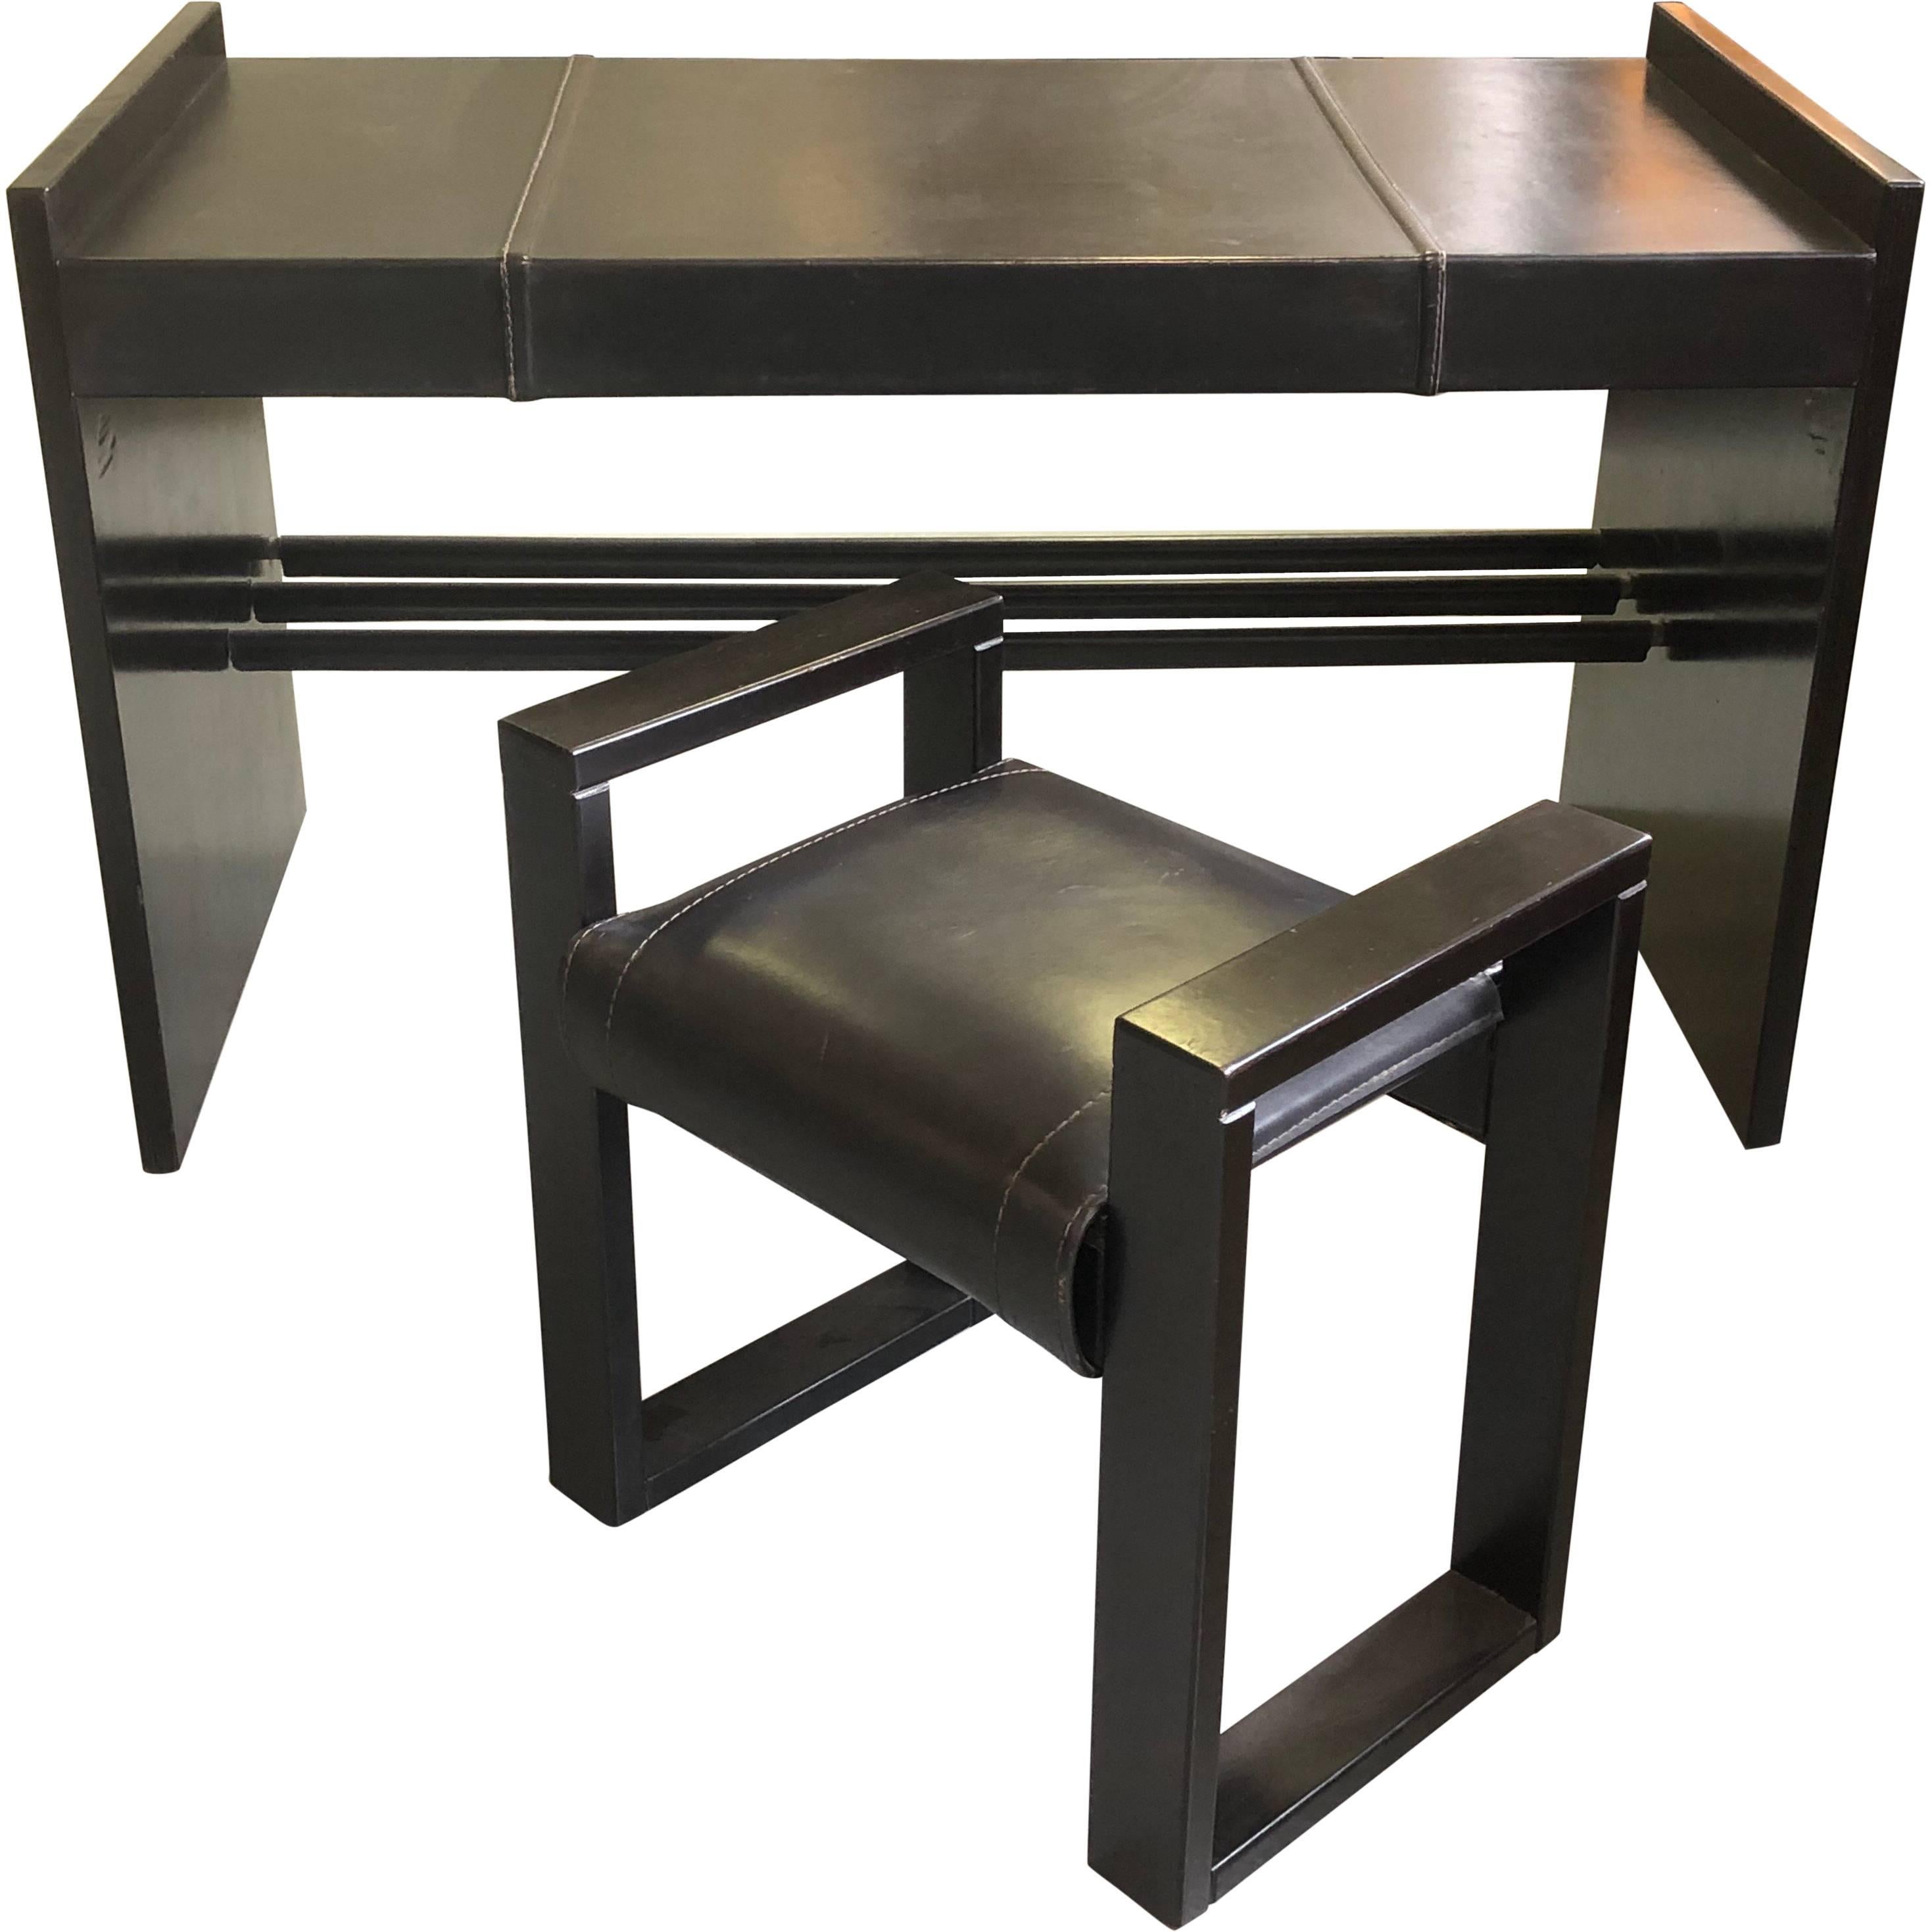 French Mid-Century Modern Stitched Black Leather Desk and Chair by Jacques Adnet